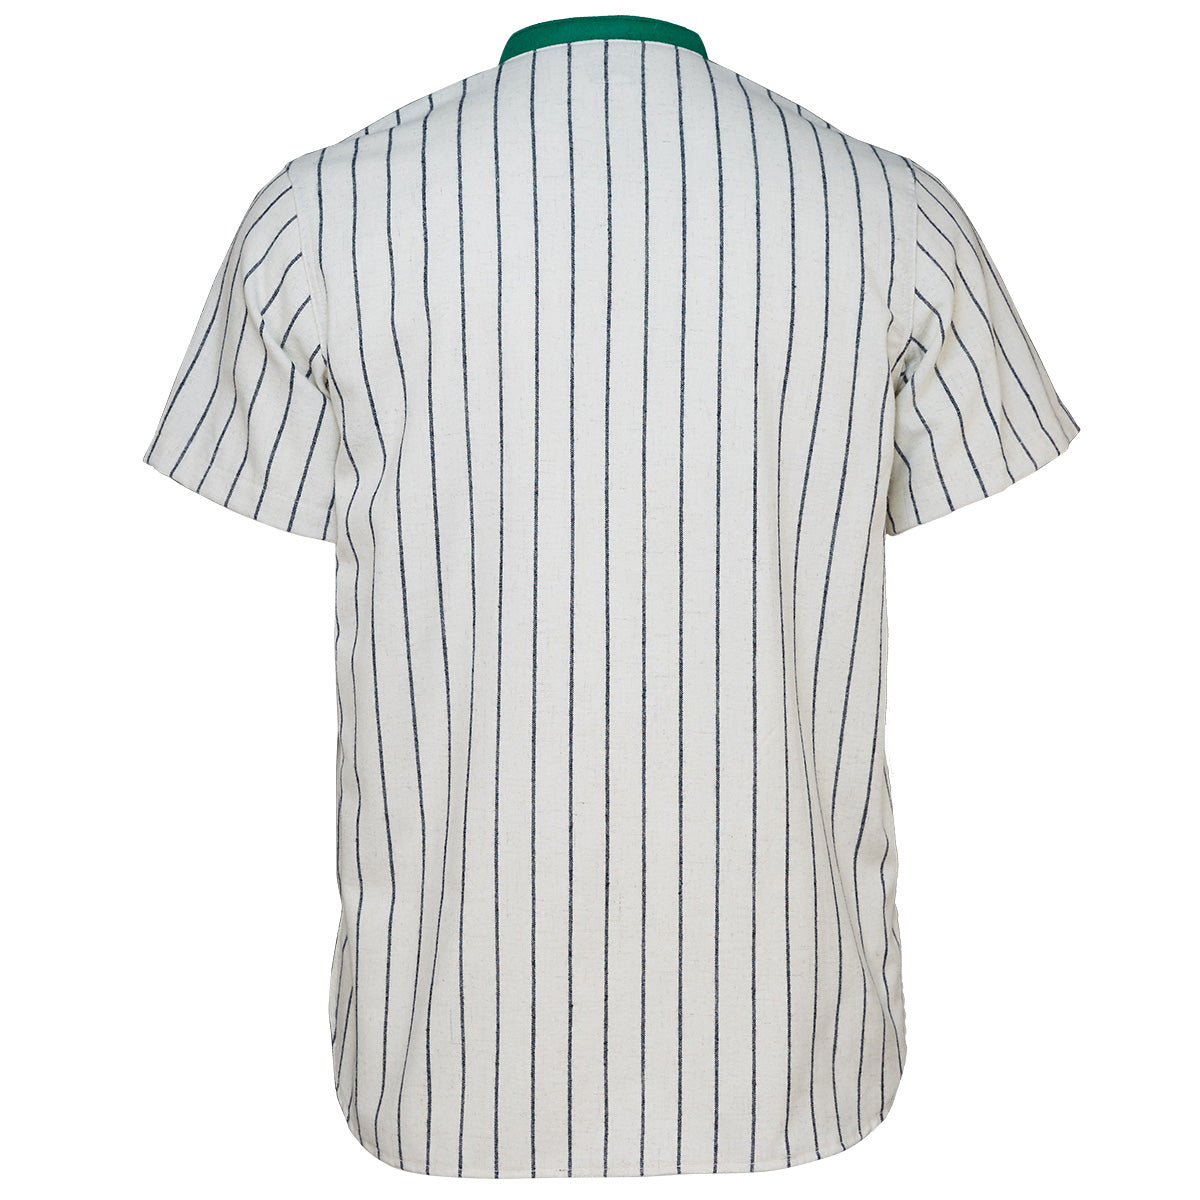 Pittsburgh Rebels 1913 Home Jersey – Ebbets Field Flannels